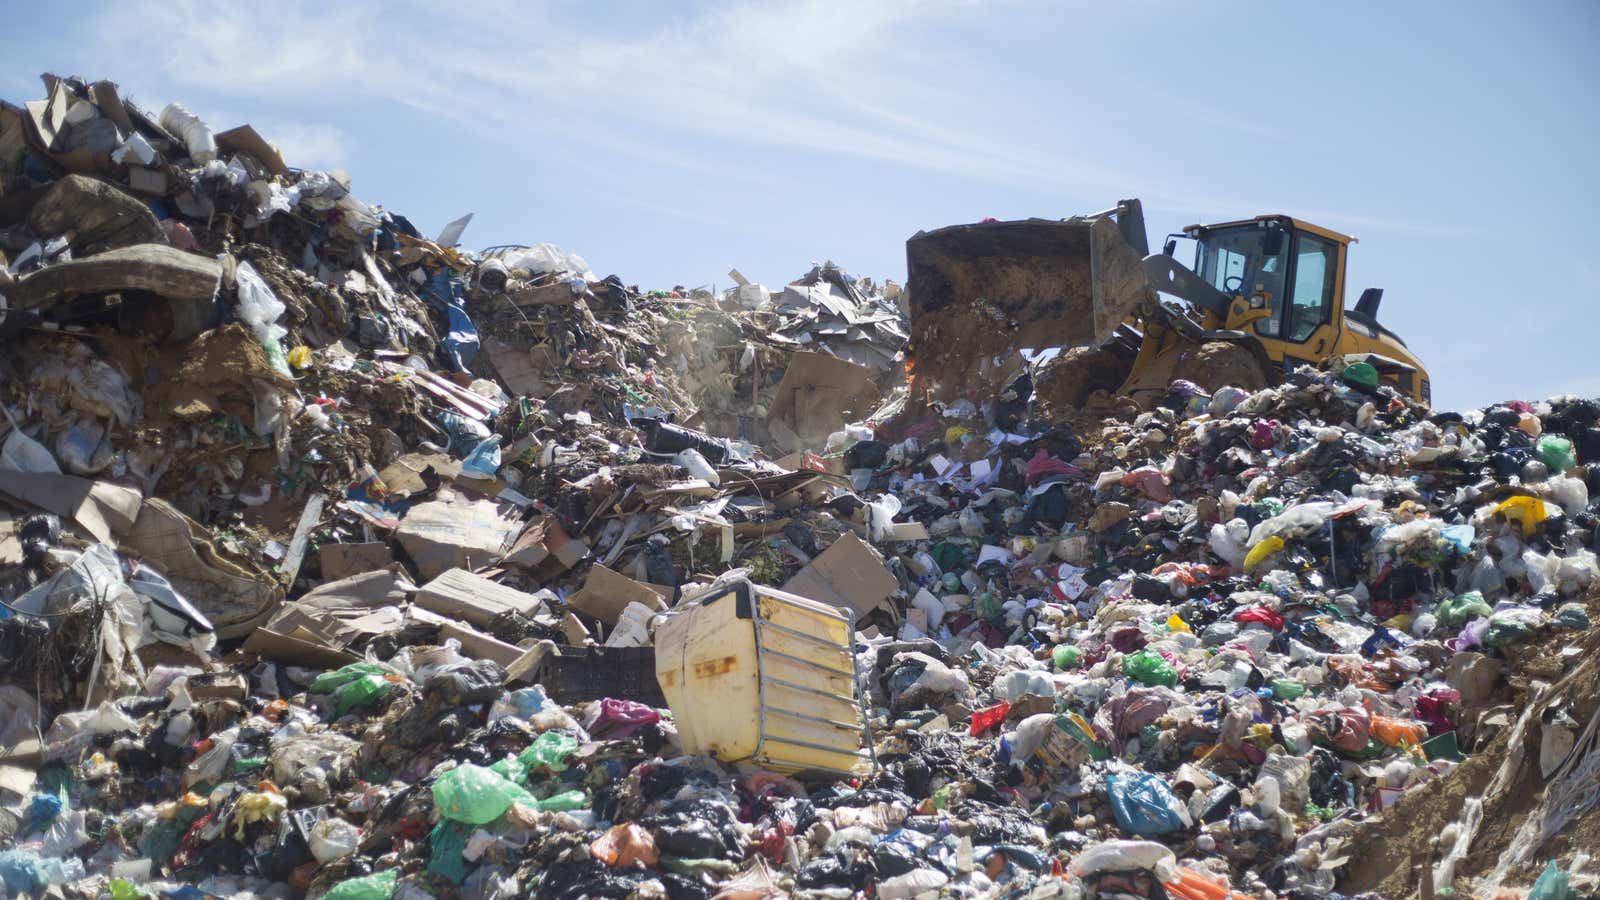 For most manufacturers, the landfill is still the smartest choice.